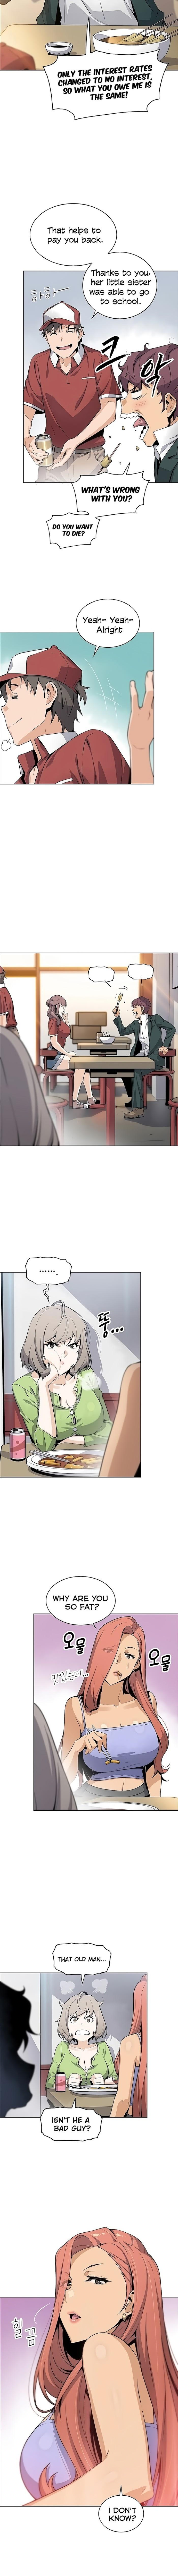 Housekeeper [Neck Pillow, Paper] Ch.49/49 [English] [Manhwa PDF] Completed 422